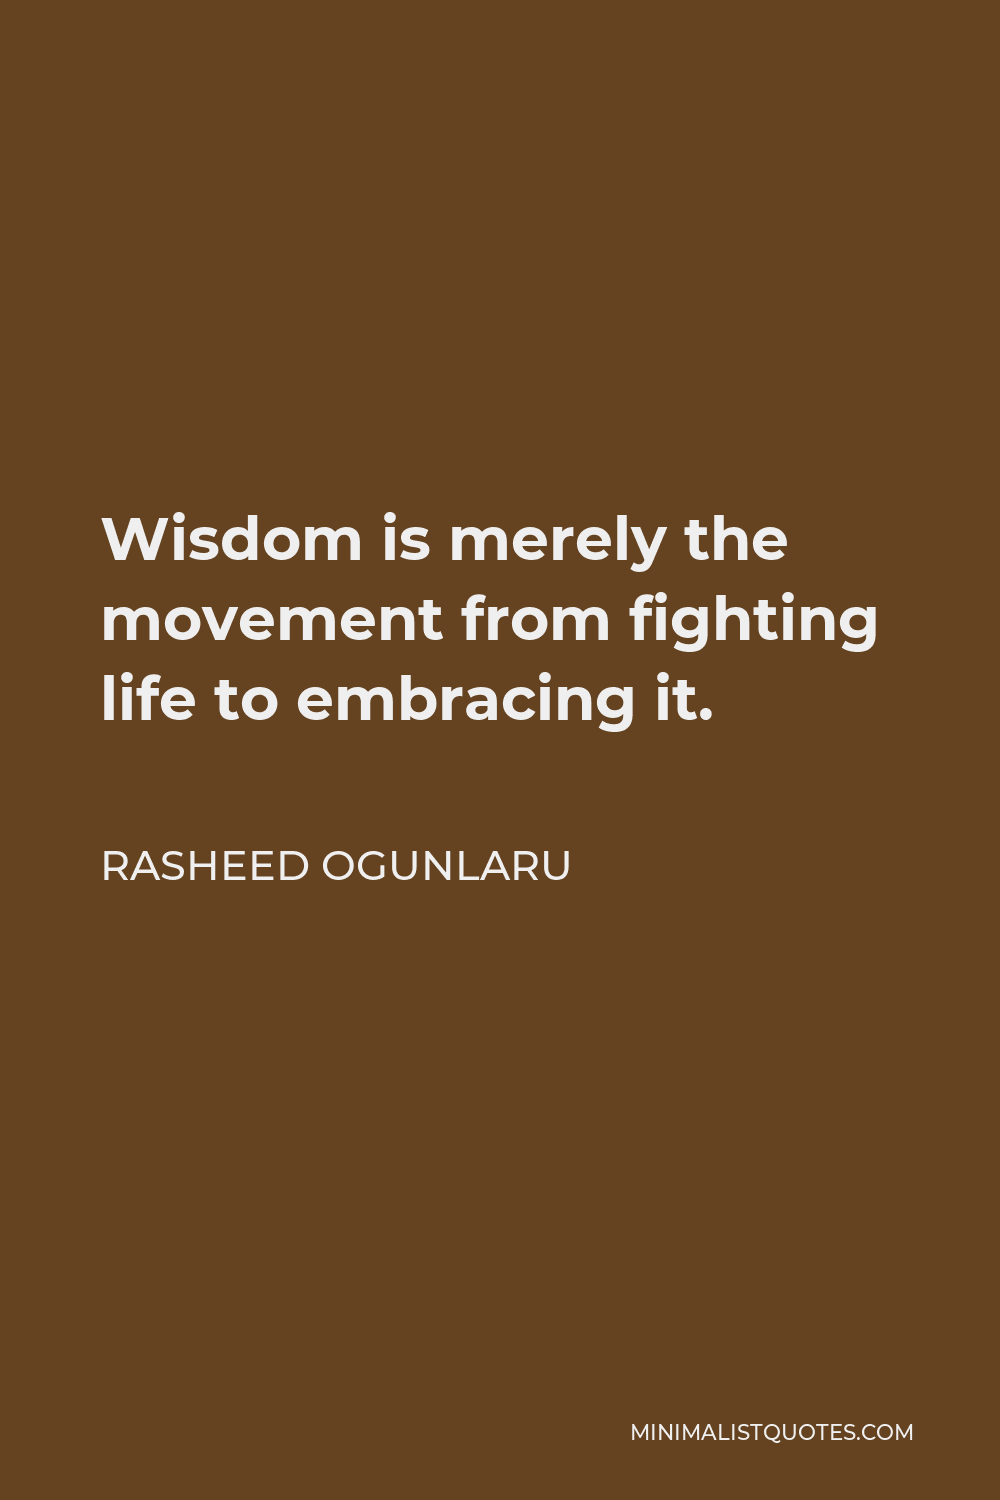 Rasheed Ogunlaru Quote - Wisdom is merely the movement from fighting life to embracing it.